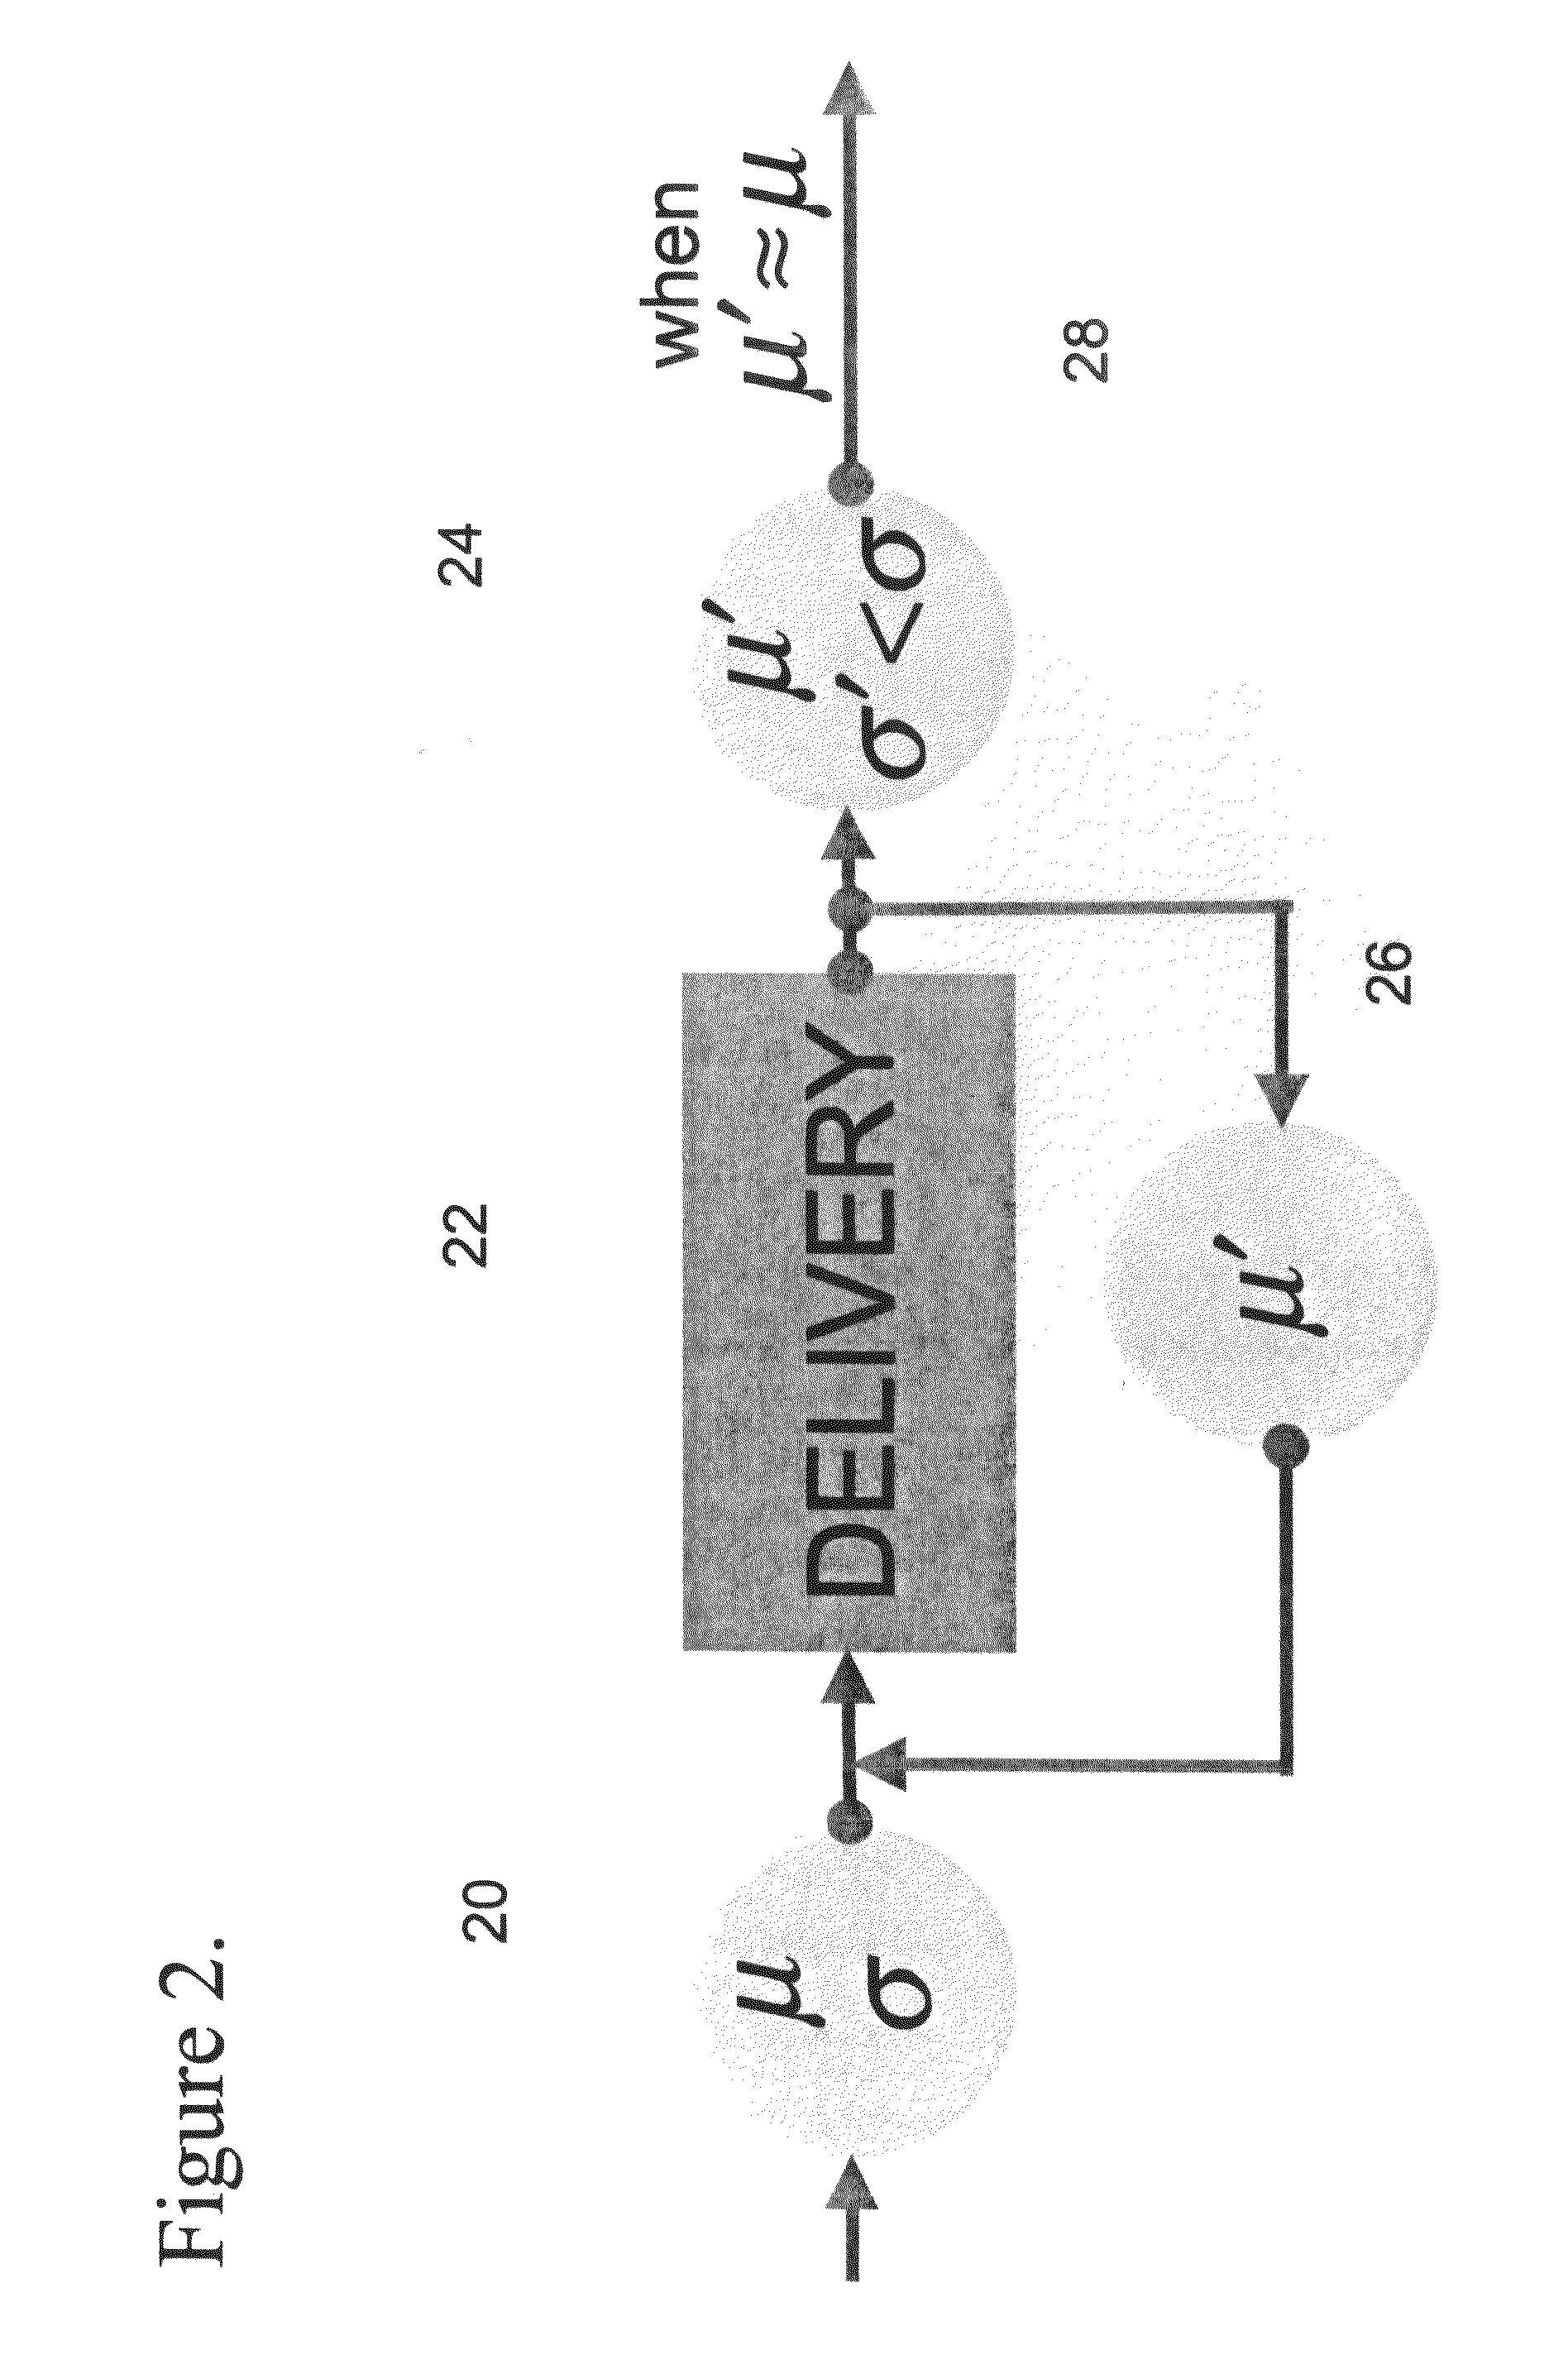 Method for determining improved estimates of properties of a model